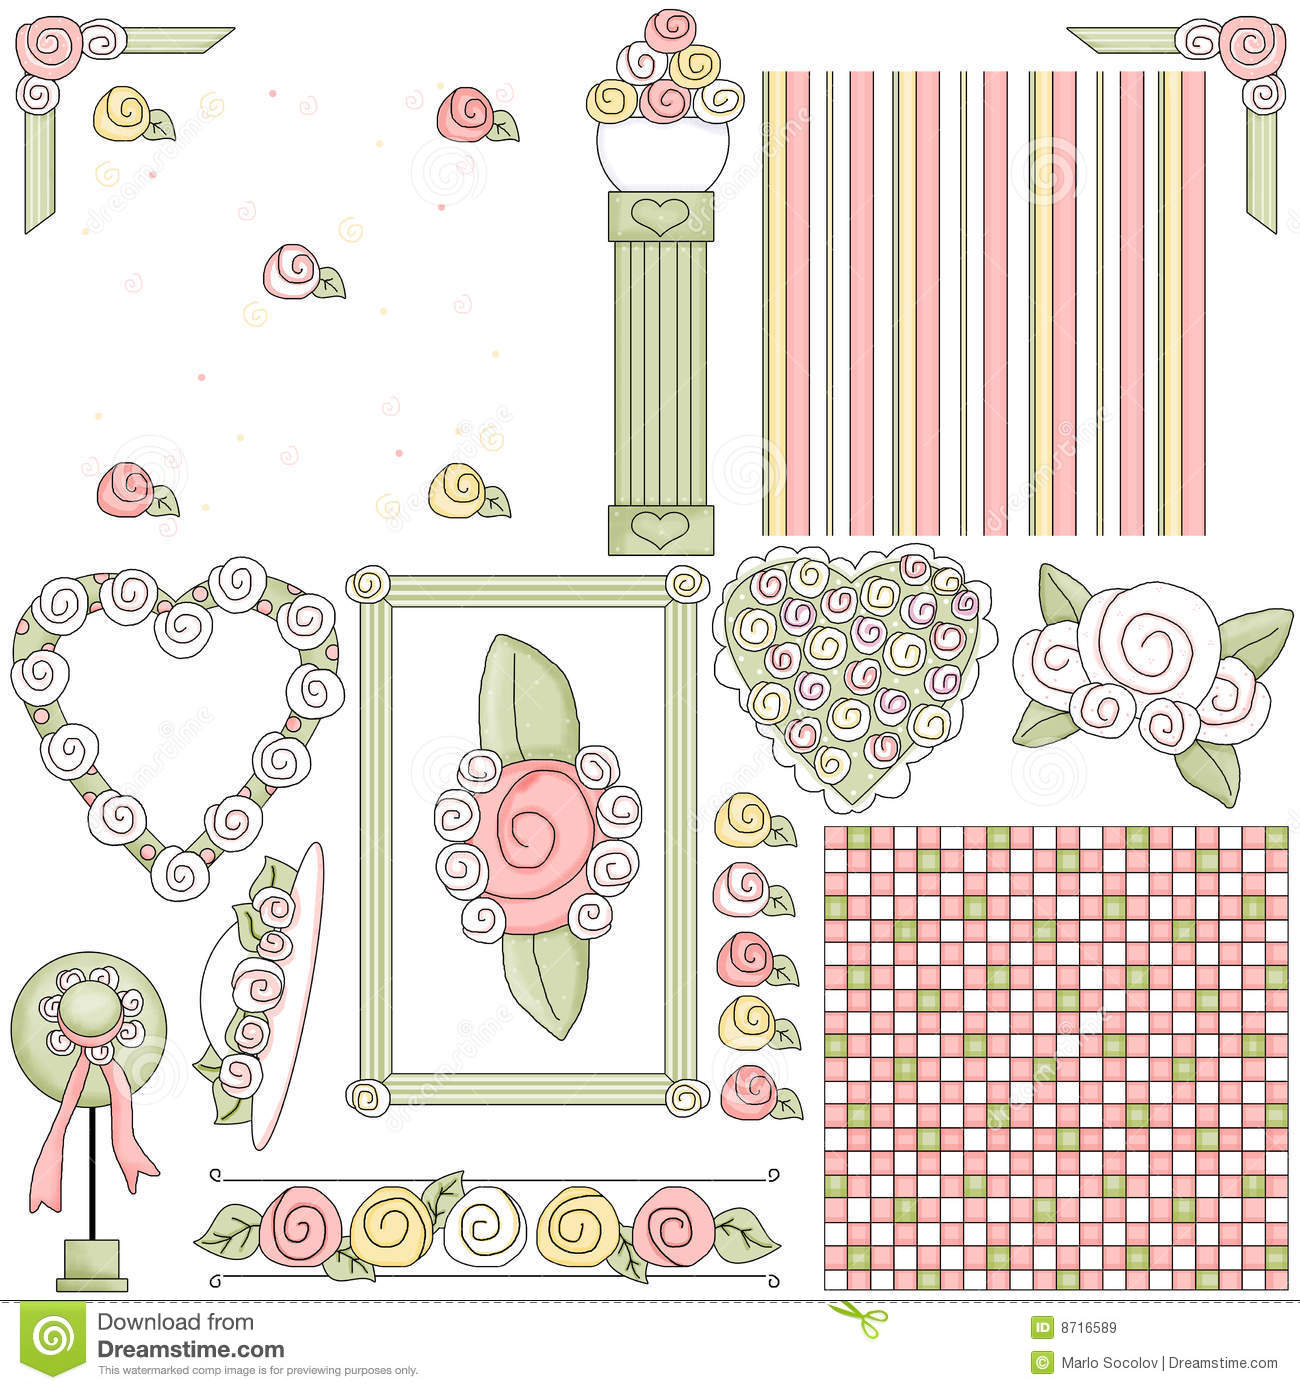     Free Stock Images  Victorian Shabby Chic Clipart  Image  8716589